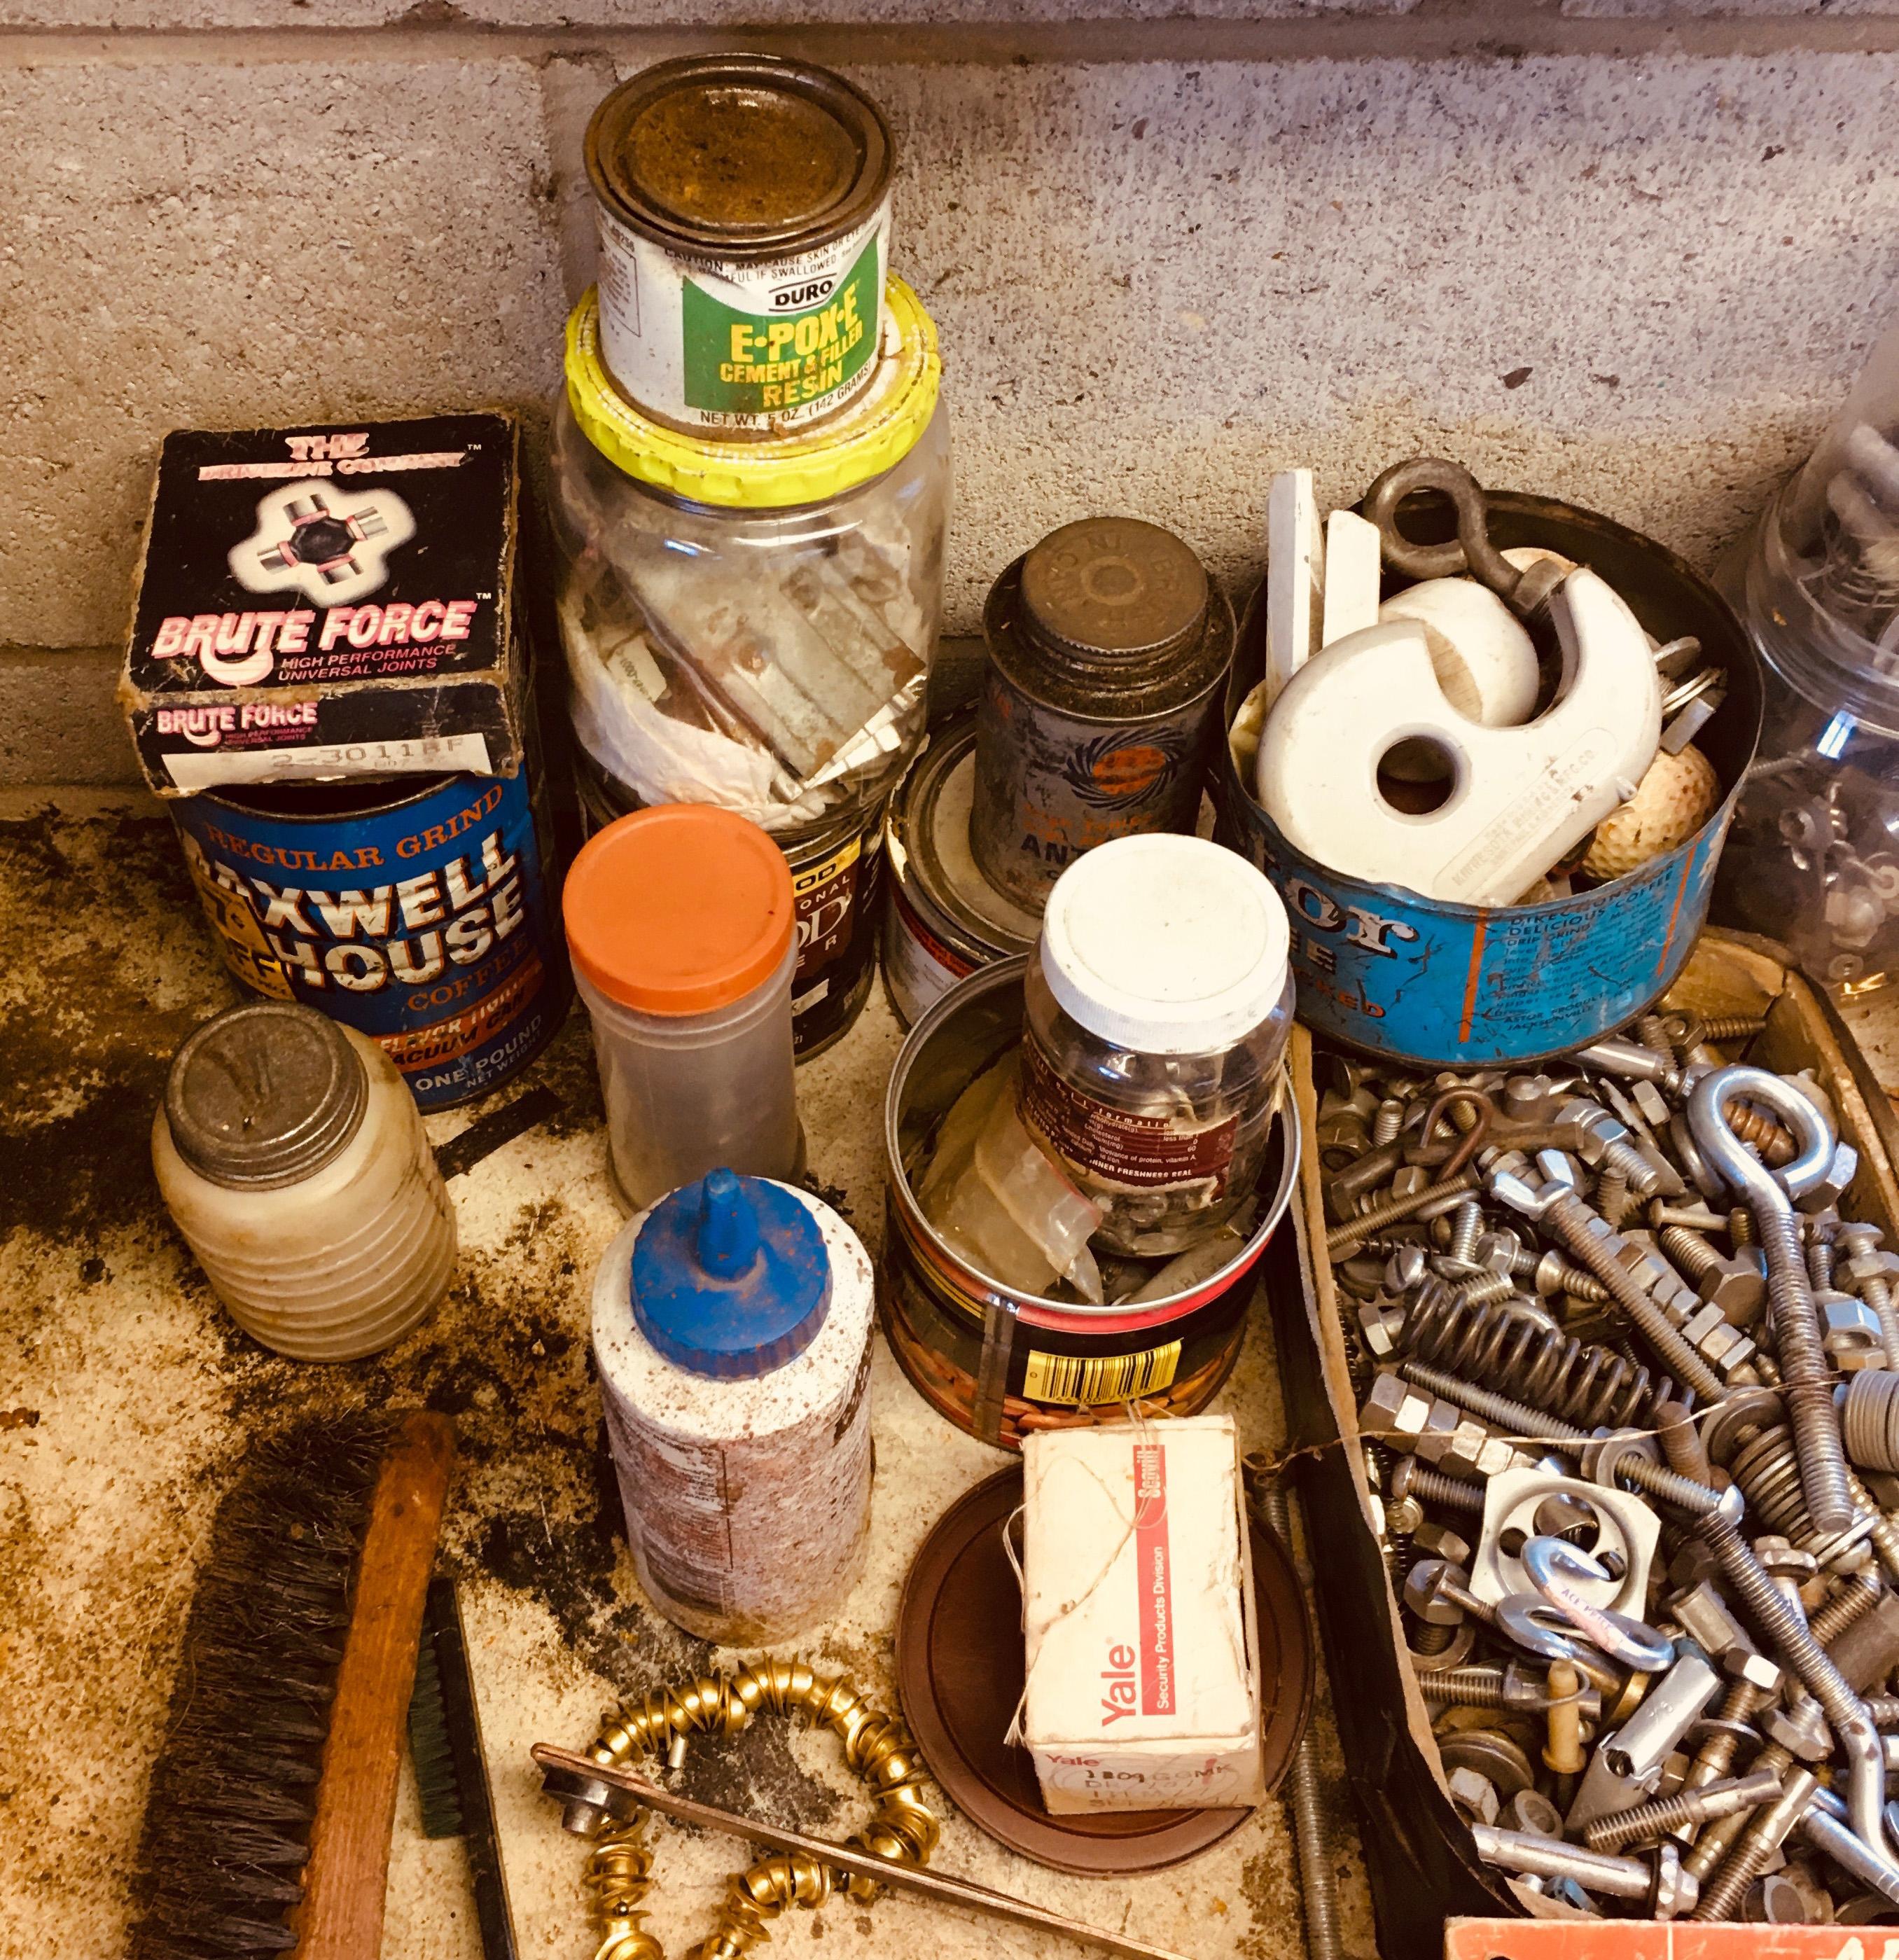 Workbench assortment. Mag Tray, Hilti, Vintage Oil Can, Nuts, Bolts and much more see pictures